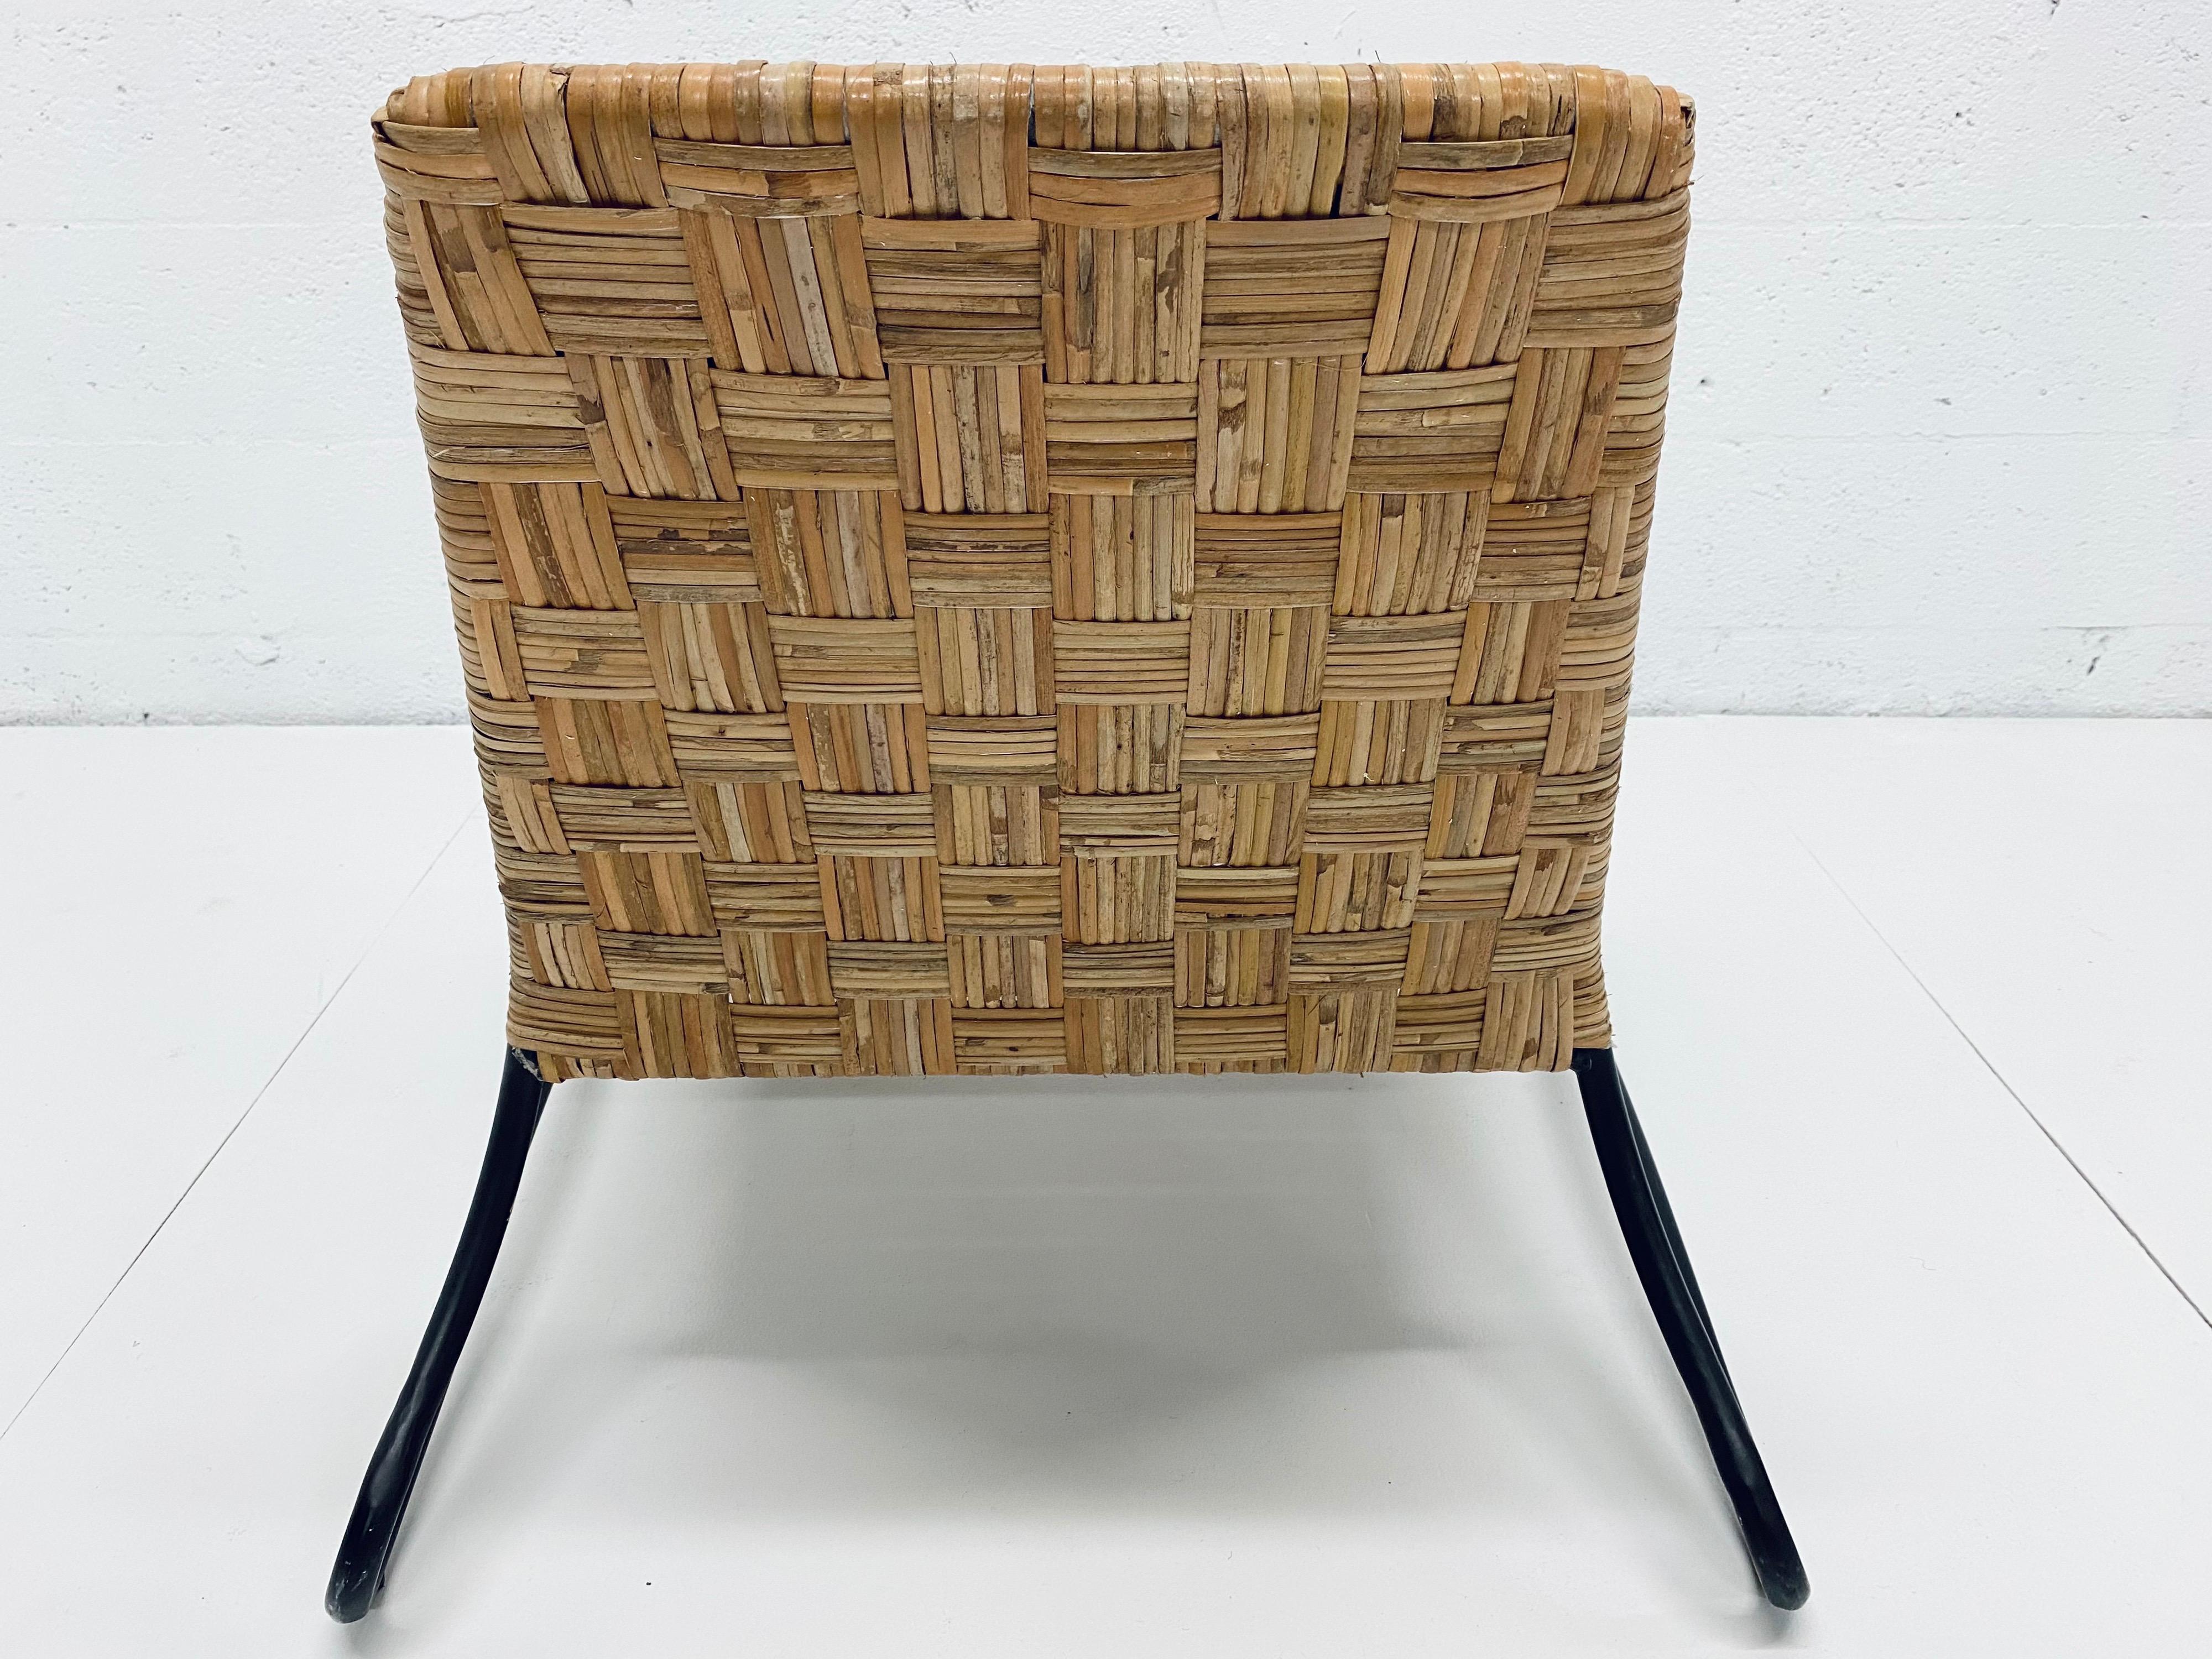 Late 20th Century Midcentury Woven Rattan Lounge Chair with Black Tubular Frame